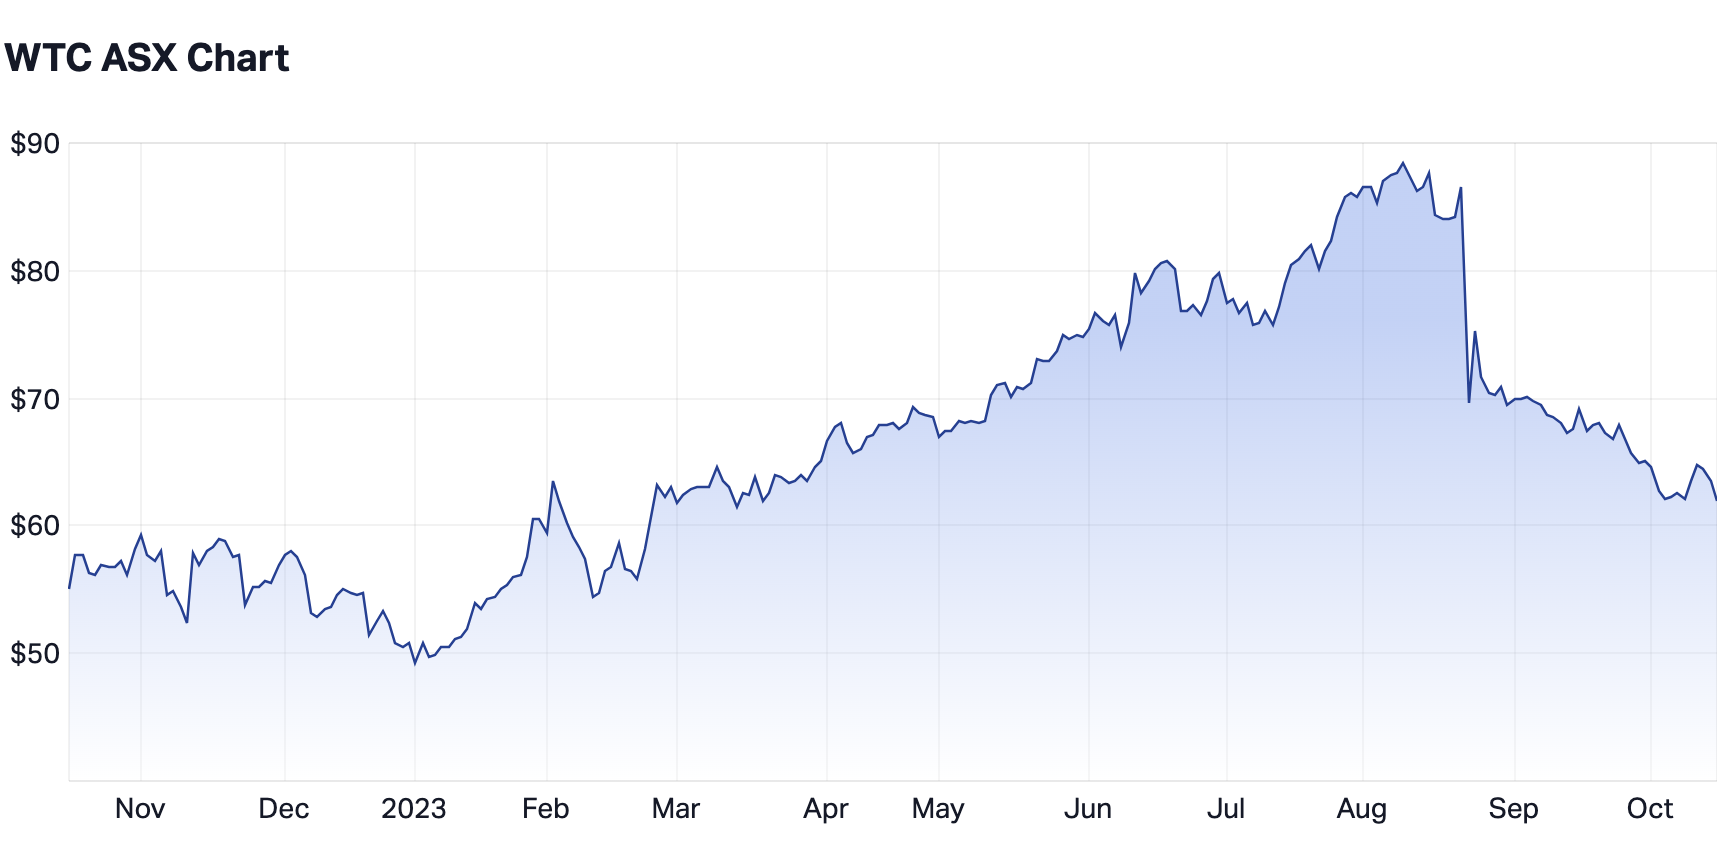 Wisetech Global 12-month share price. (Source: Market Index)